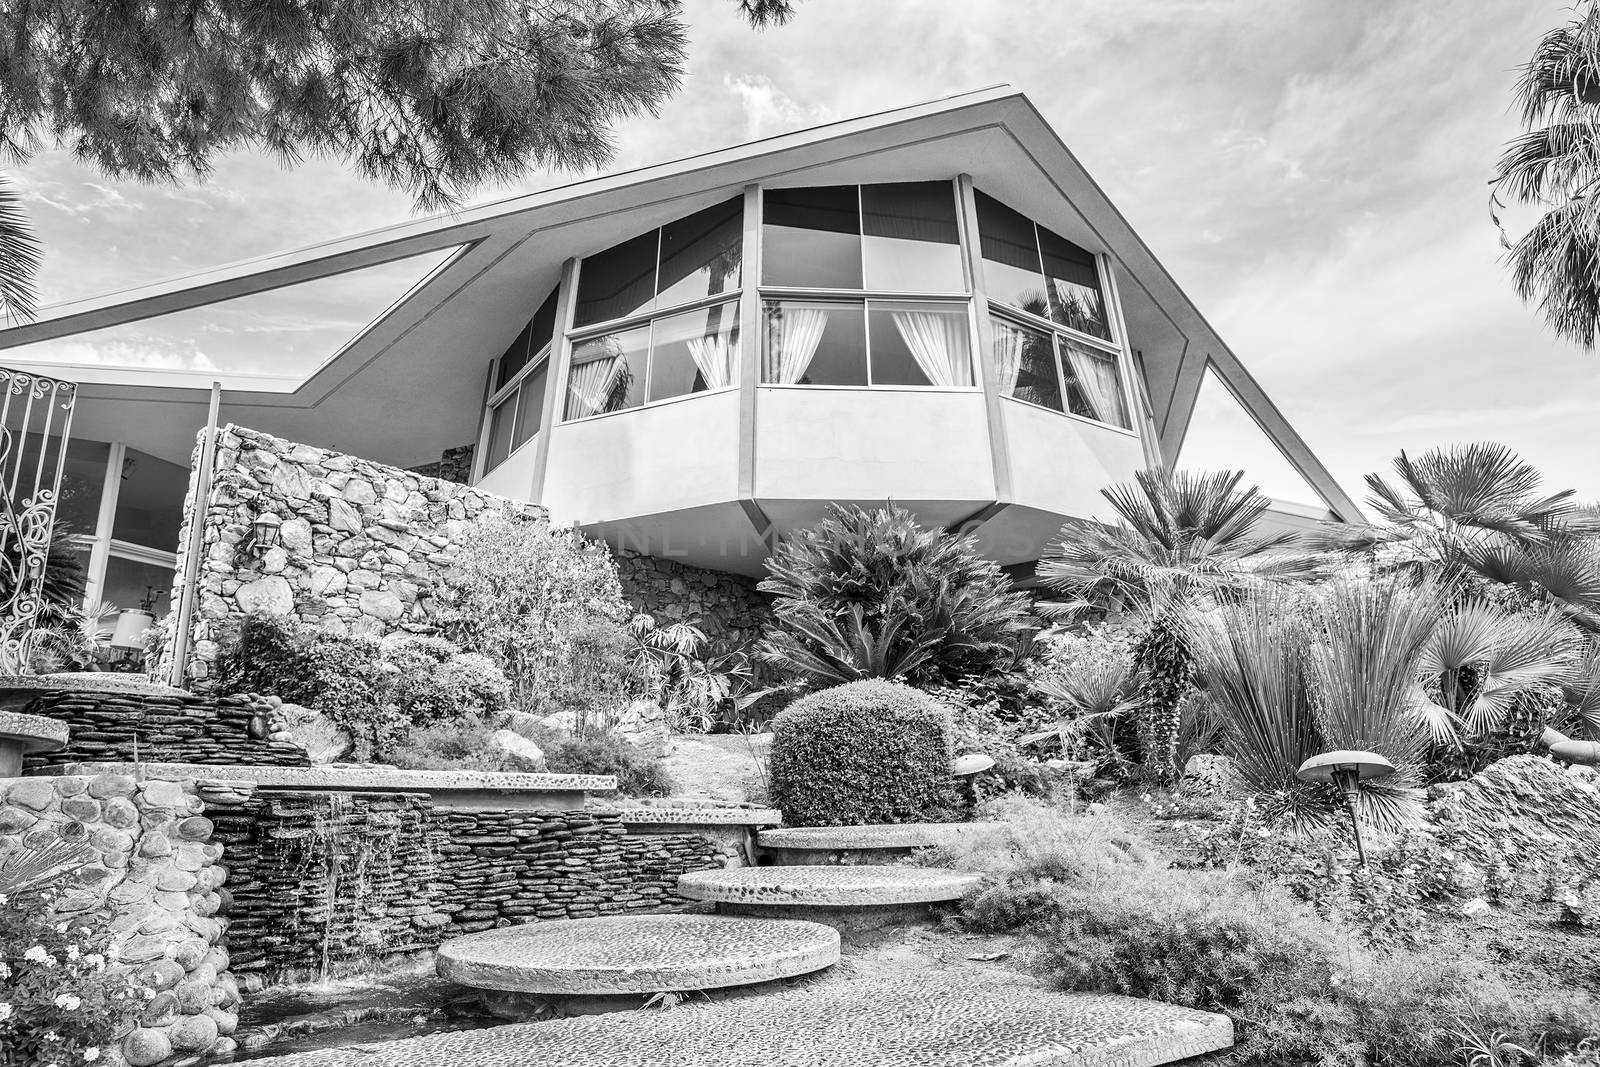 PALM SPRINGS, RIVERSIDE COUNTY, CALIFORNIA, USA - SEPTEMBER 20:  Historic mid century home built by Robert Alexander, designated The House of Tomorrow and used by Elvis Presley and Priscilla Presley on their honeymoon in 1967, on September 20, 2015 in Palm Springs, California, USA.